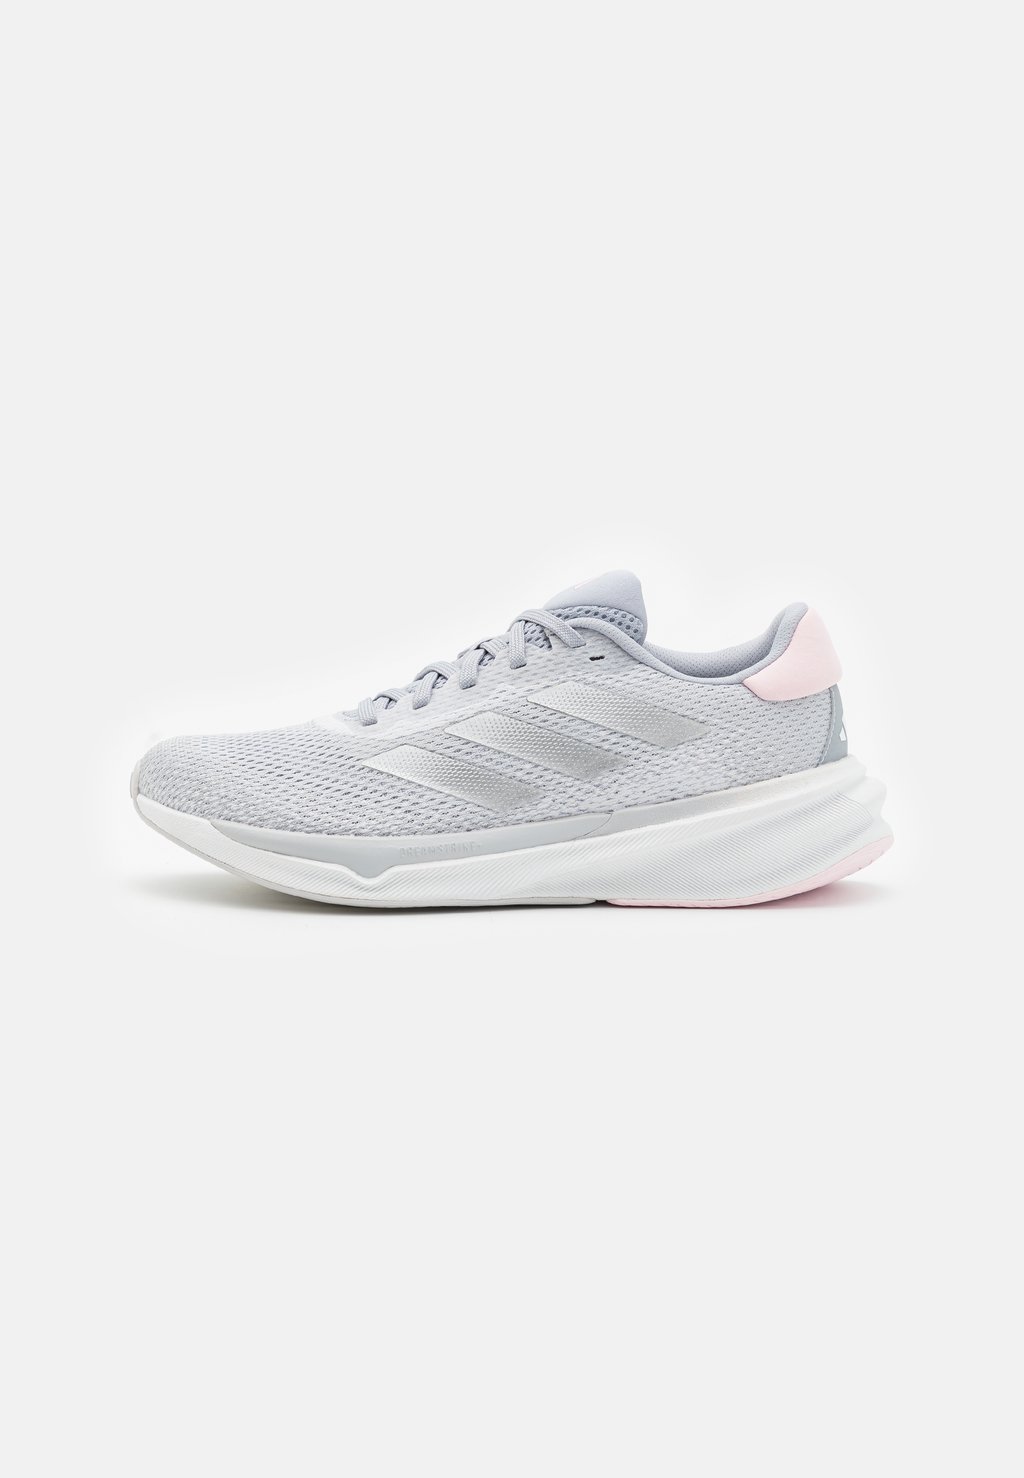 кроссовки adidas originals forum plus footwear white clear pink Нейтральные кроссовки SUPERNOVA STRIDE adidas Performance, цвет halo silver/footwear white/clear pink